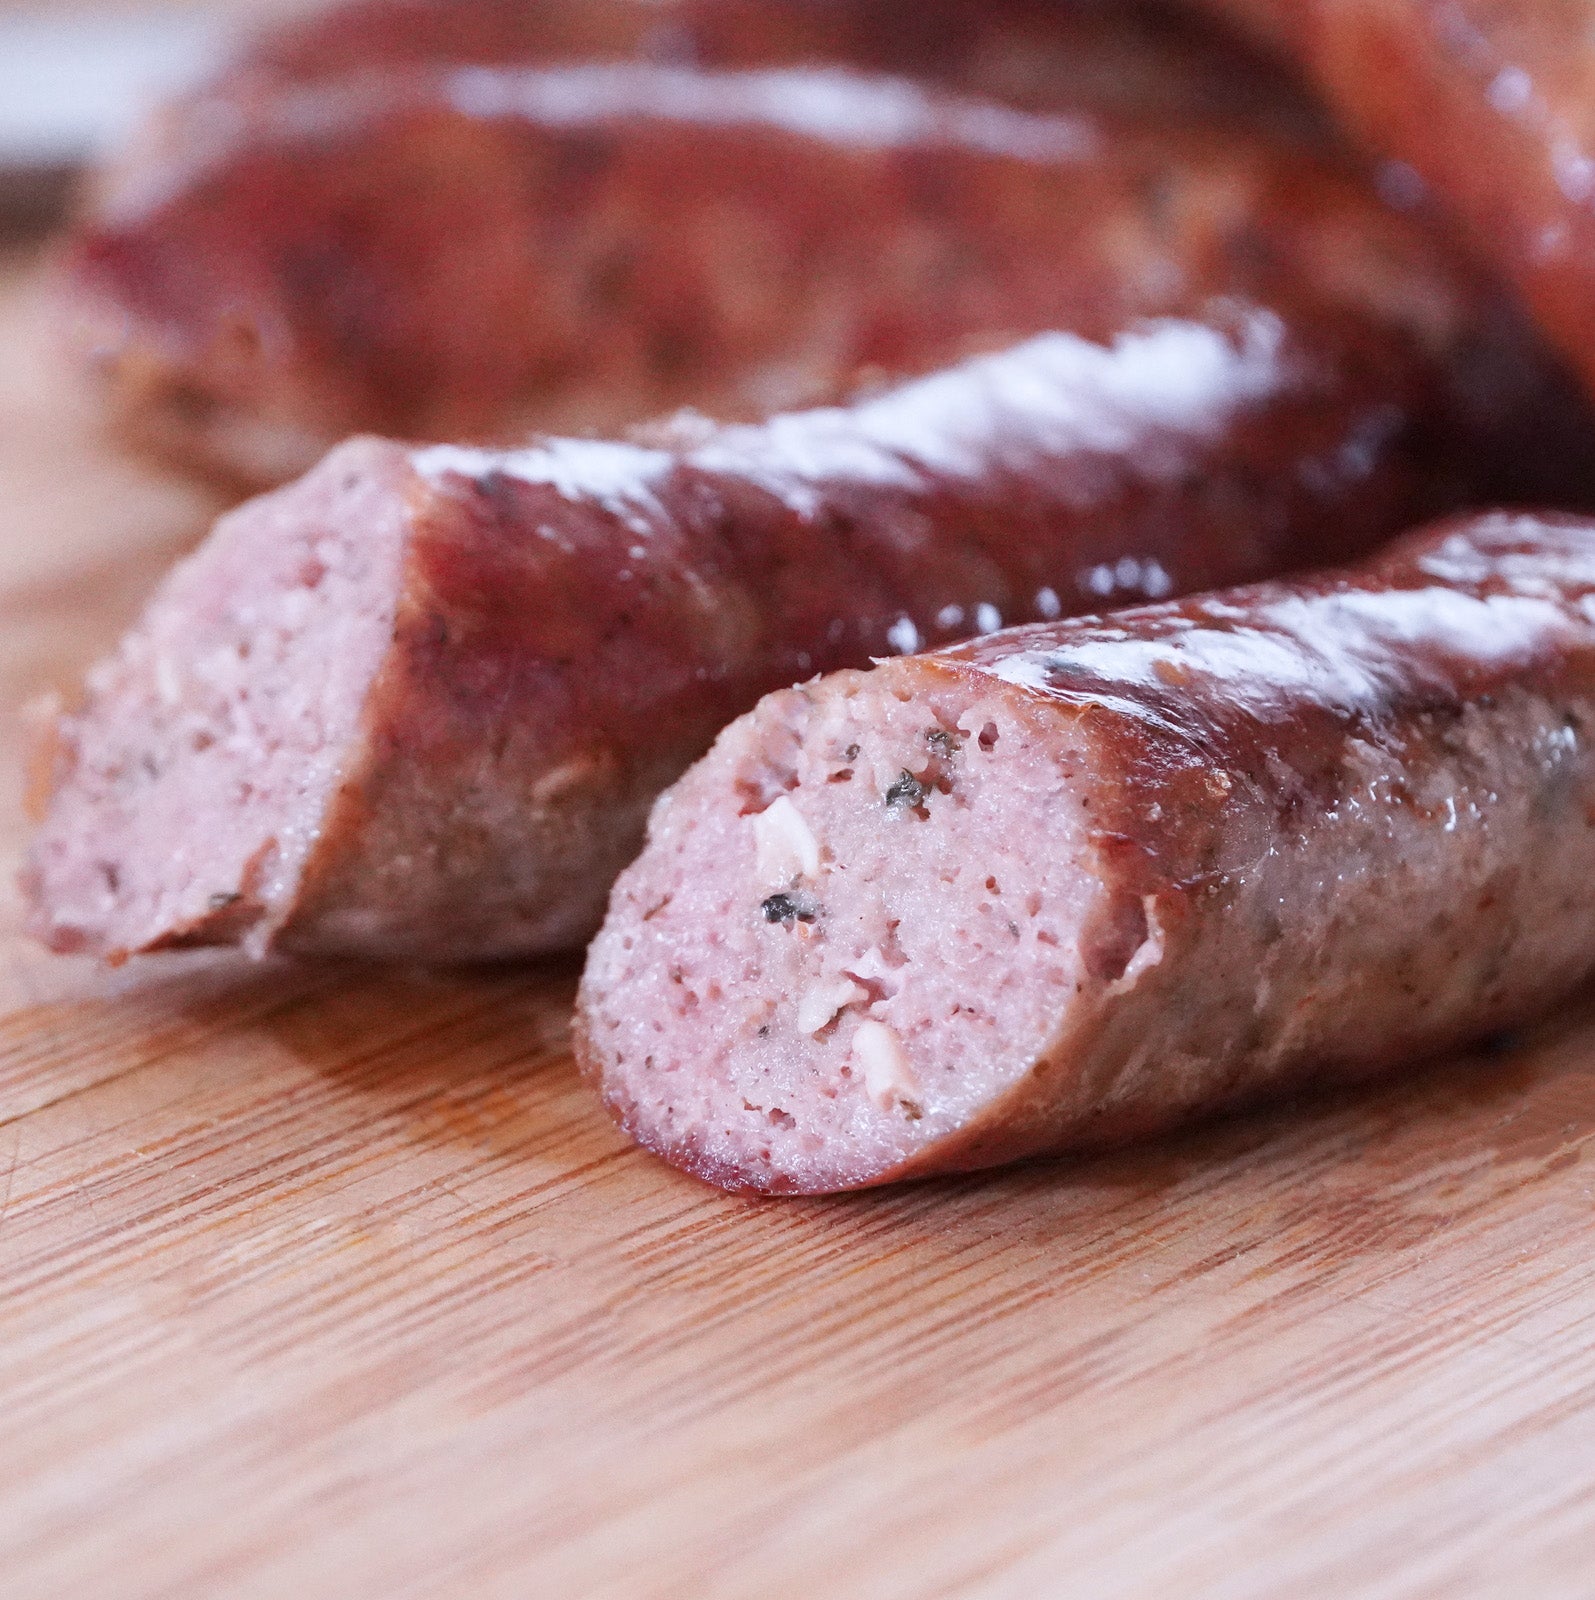 All-Natural Grass-Fed Lamb Sausage from New Zealand (300g) - Horizon Farms